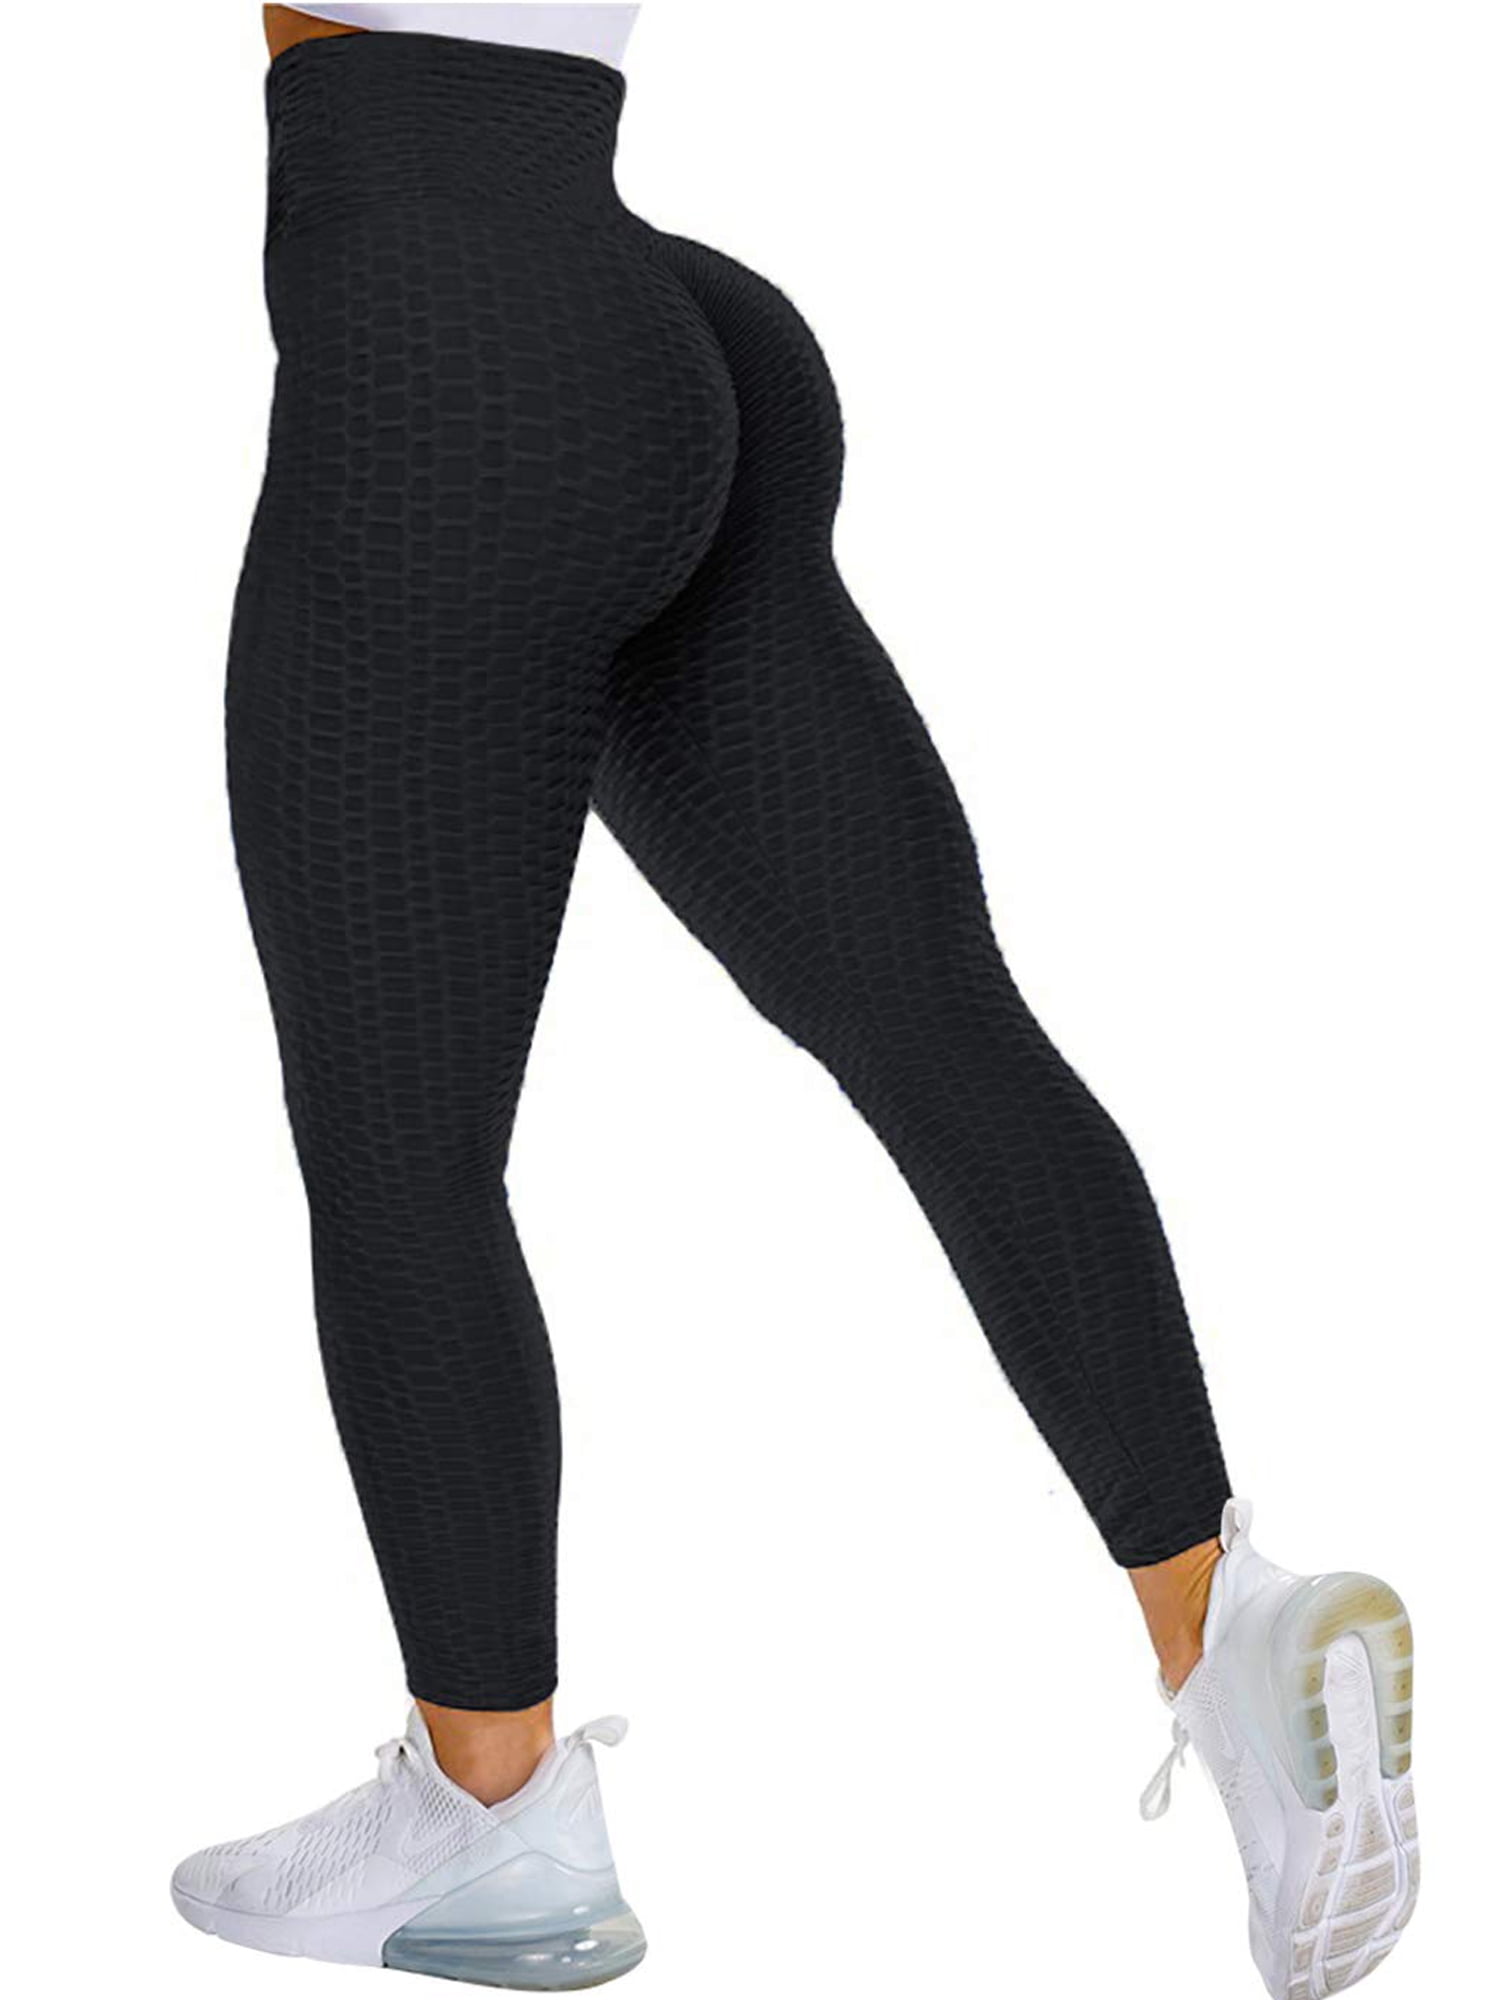 RUIY Yoga Leggings for Women Scrunch Butt High Waist Workout Pants Butt  Lift Seamless Soft Comfy Athletic Casual Tights Pants That Make Your Butt Look  Good Fitness Stretch Trendy Leggings Trousers 